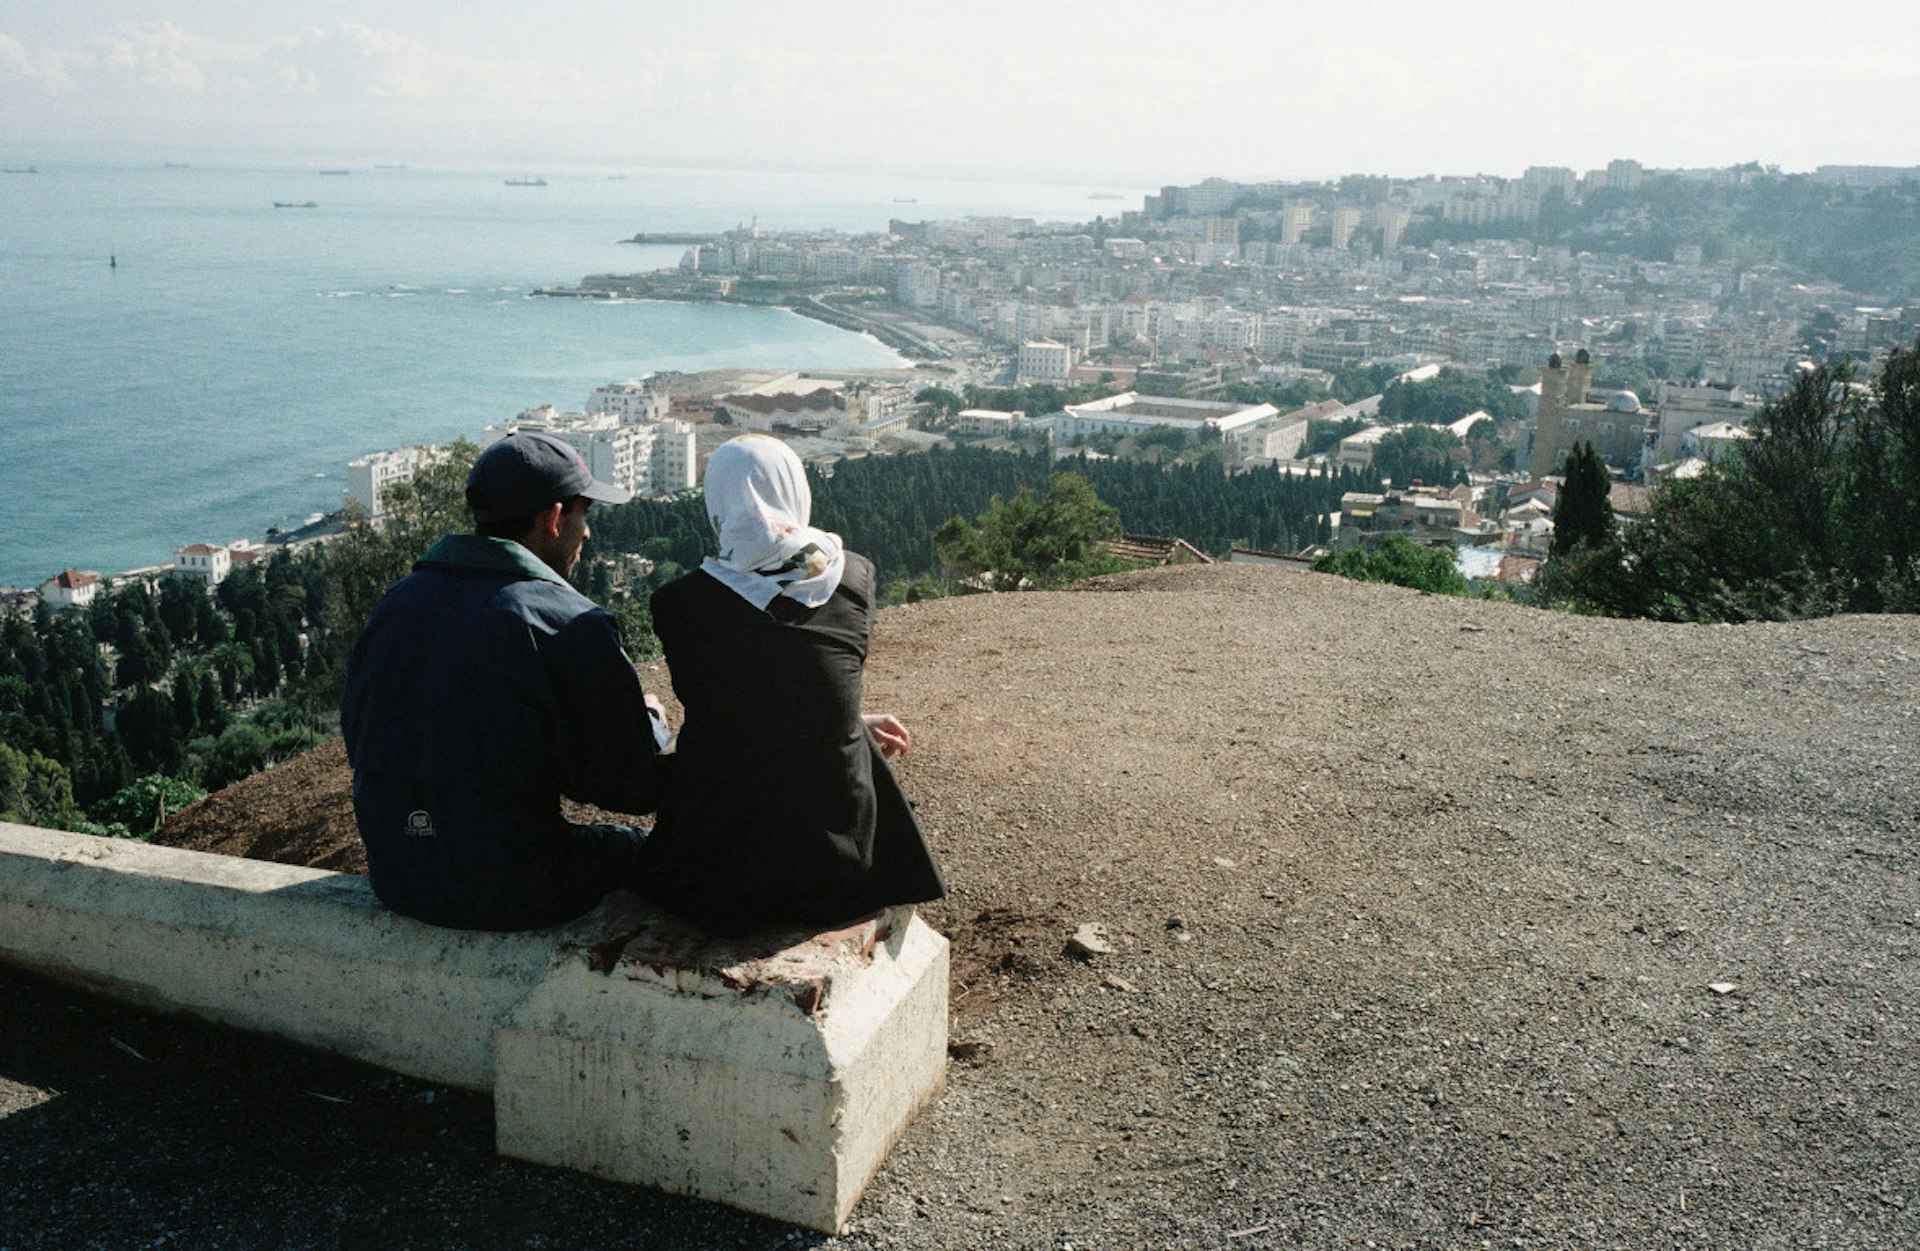 A photographic celebration of love in the Middle East